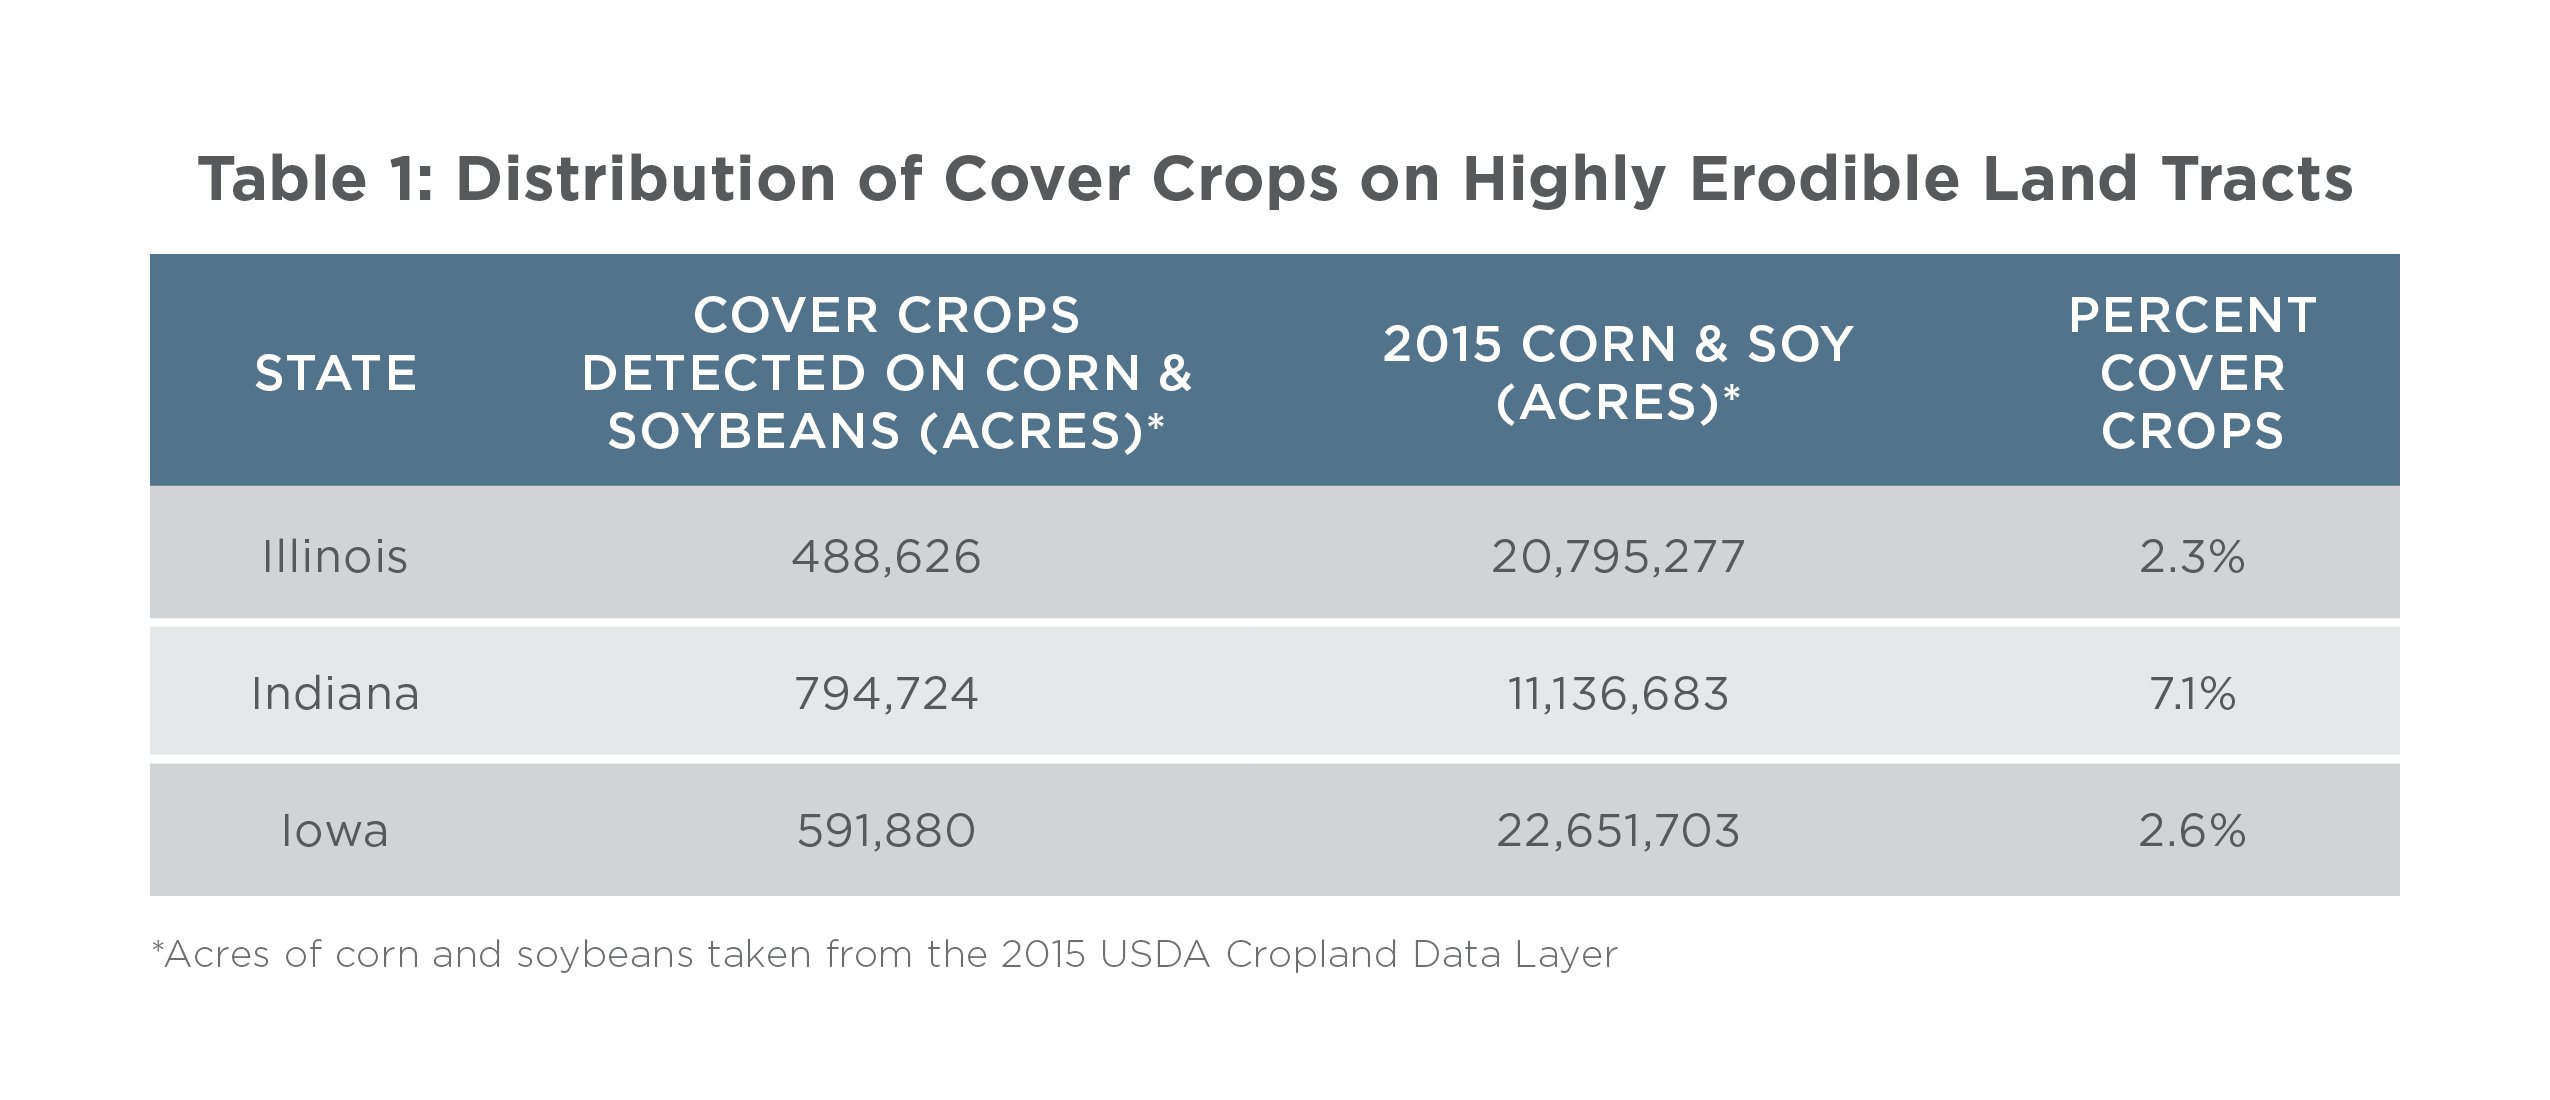 Table showing distribution of cover crops on highly erodible land tracts